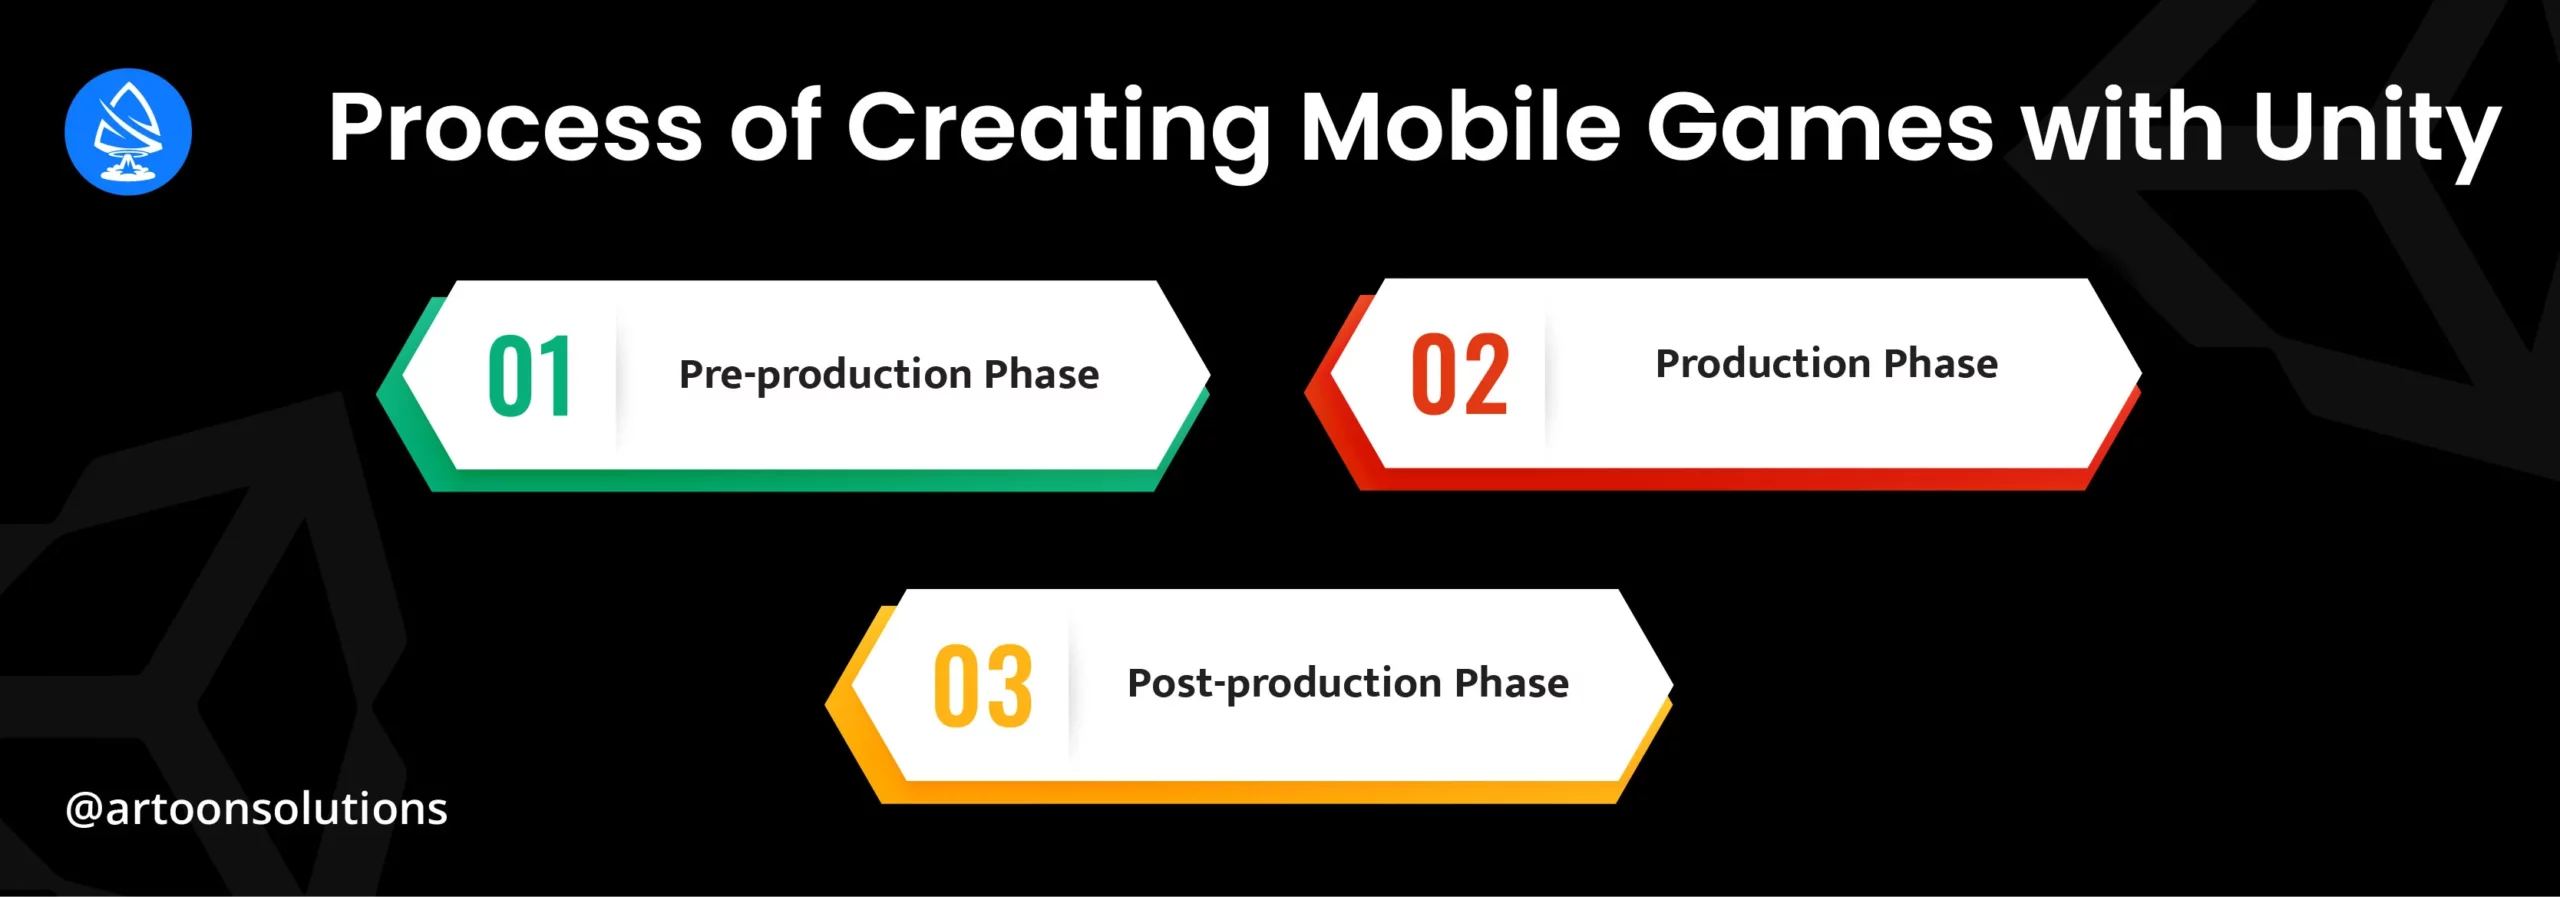 Process of Creating Mobile Games with Unity